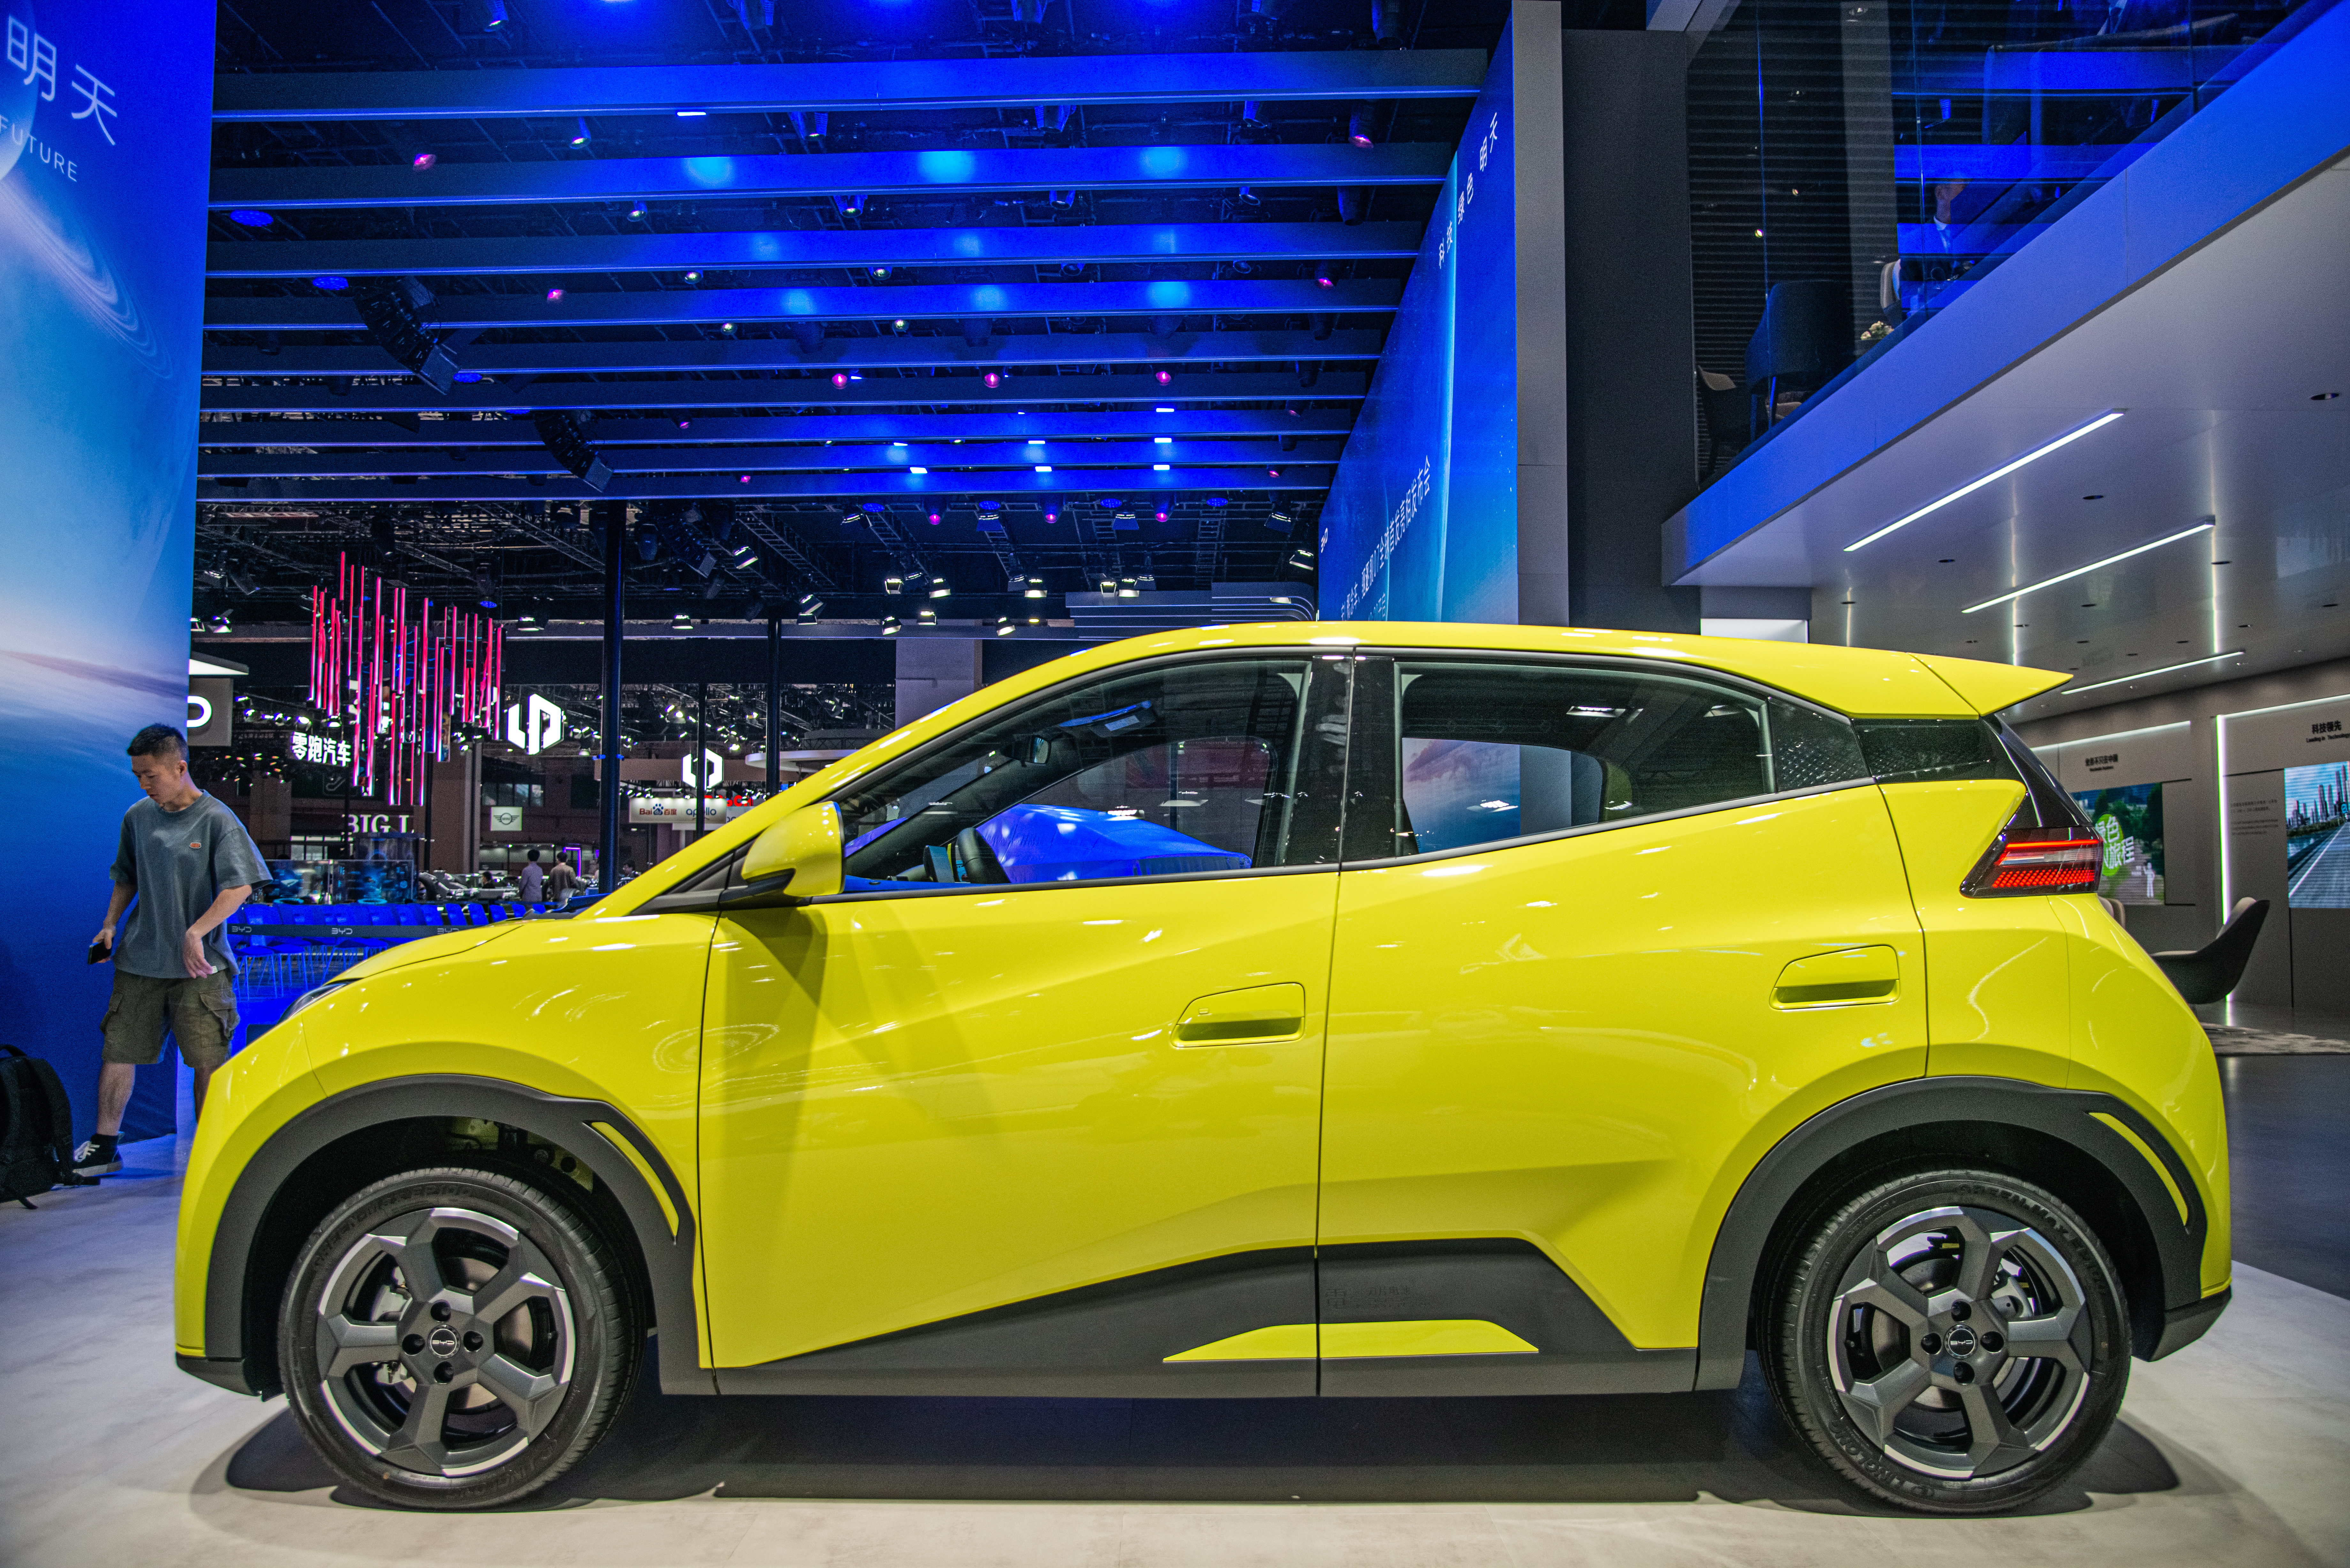 A squat yellow hybrid car on display in a large room with a high, blue-lit ceiling. 